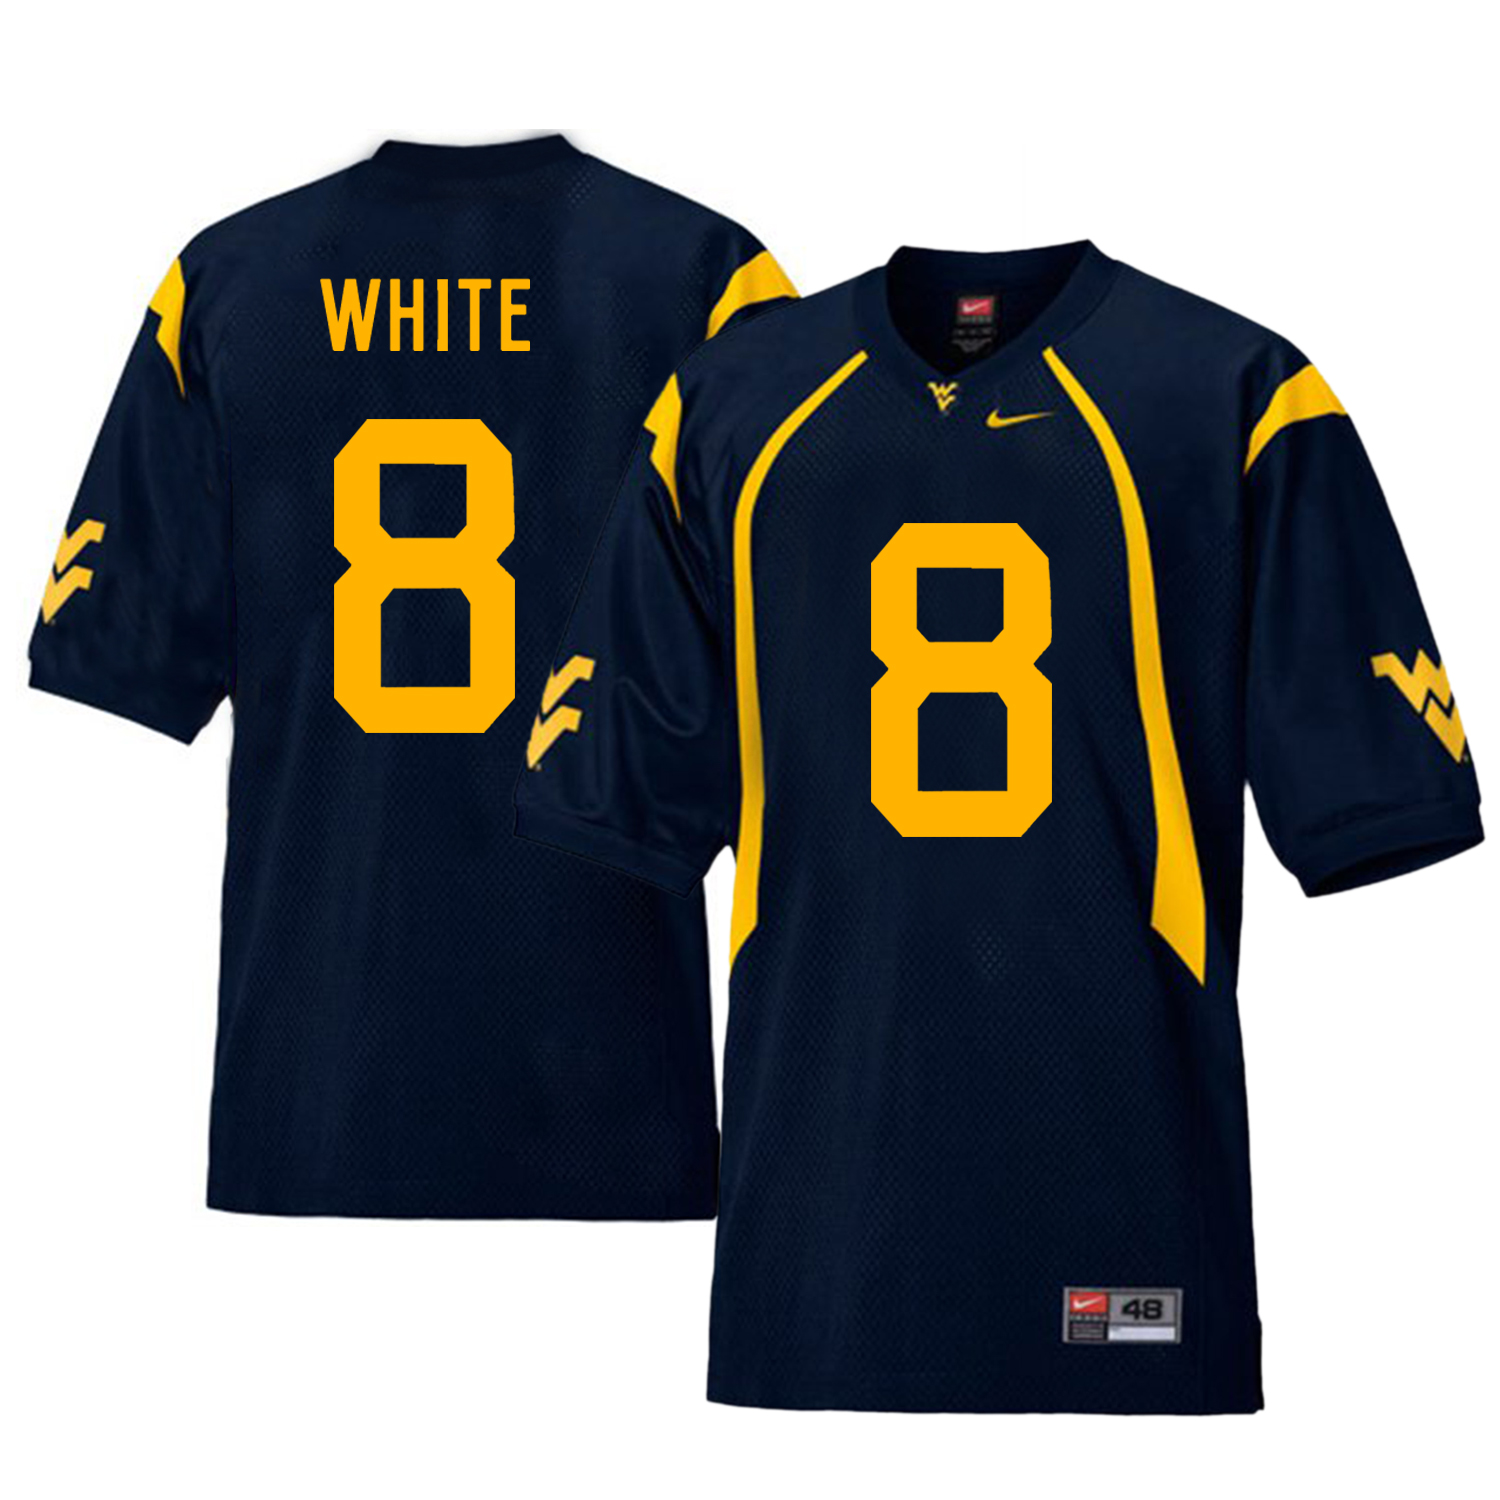 West Virginia Mountaineers 8 Kyzir White Navy College Football Jersey